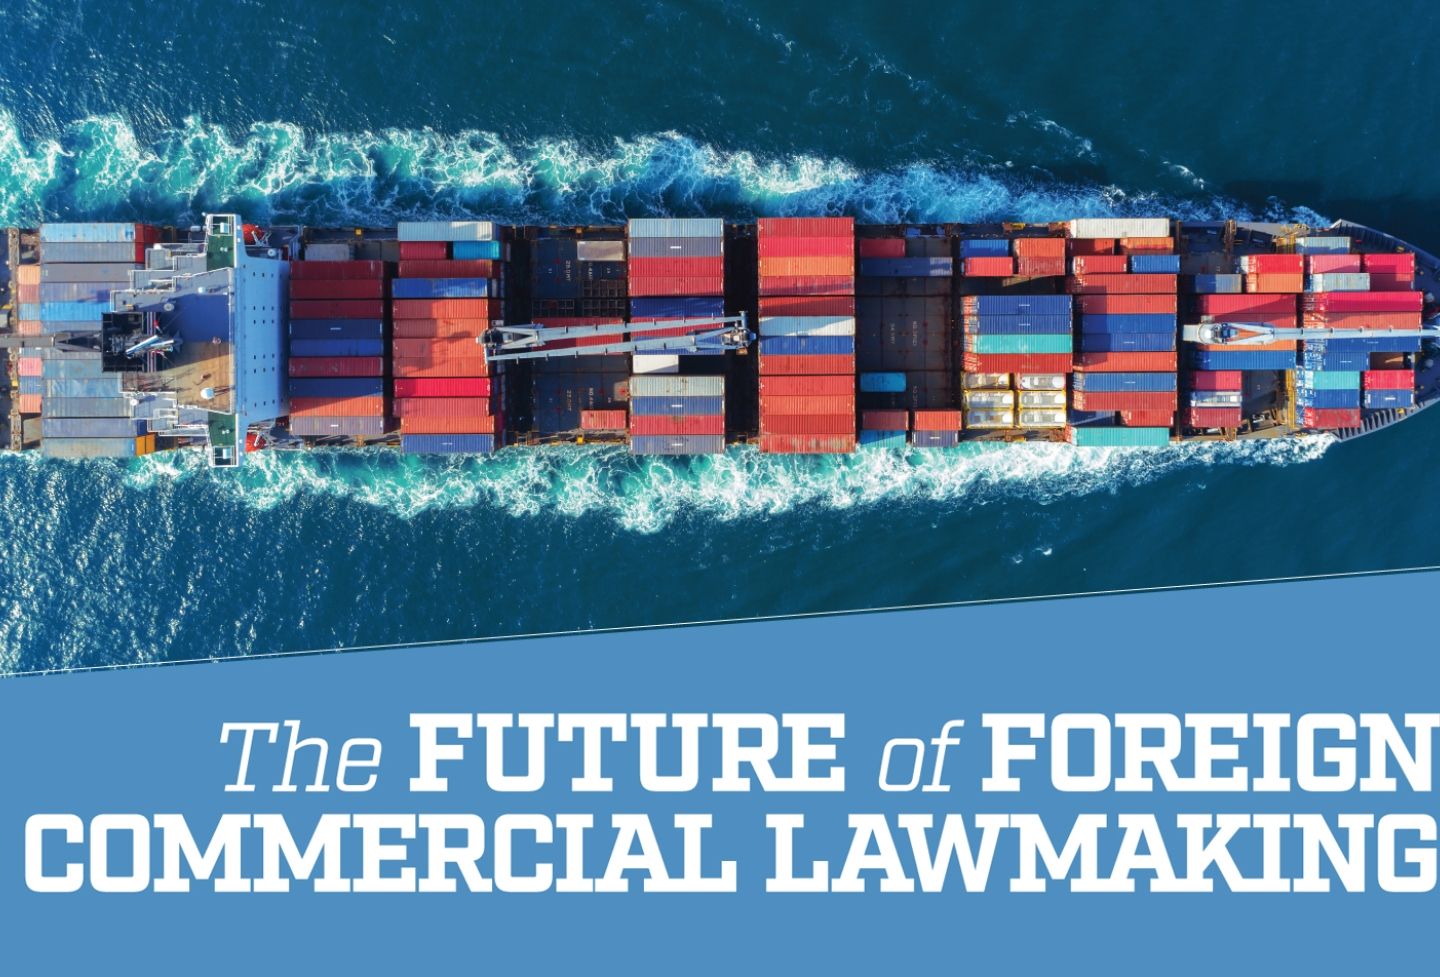 “The Future of Foreign Commercial Lawmaking”